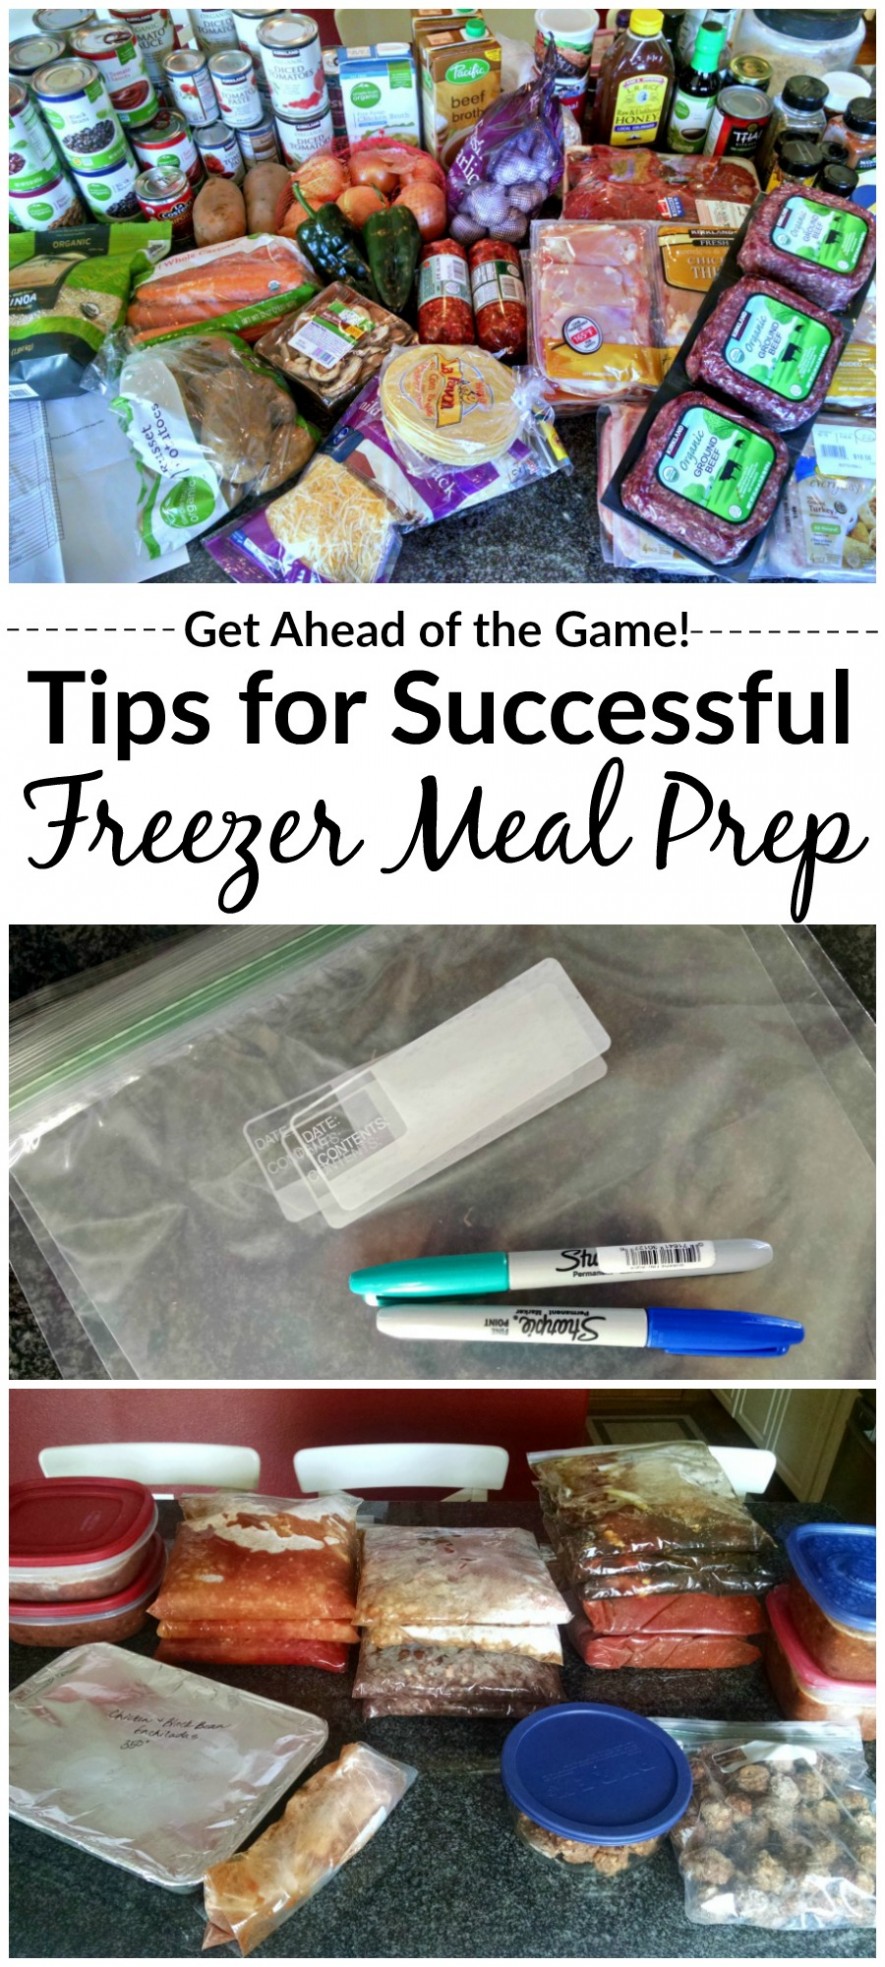 Great tips for successful freezer meal prep sessions!